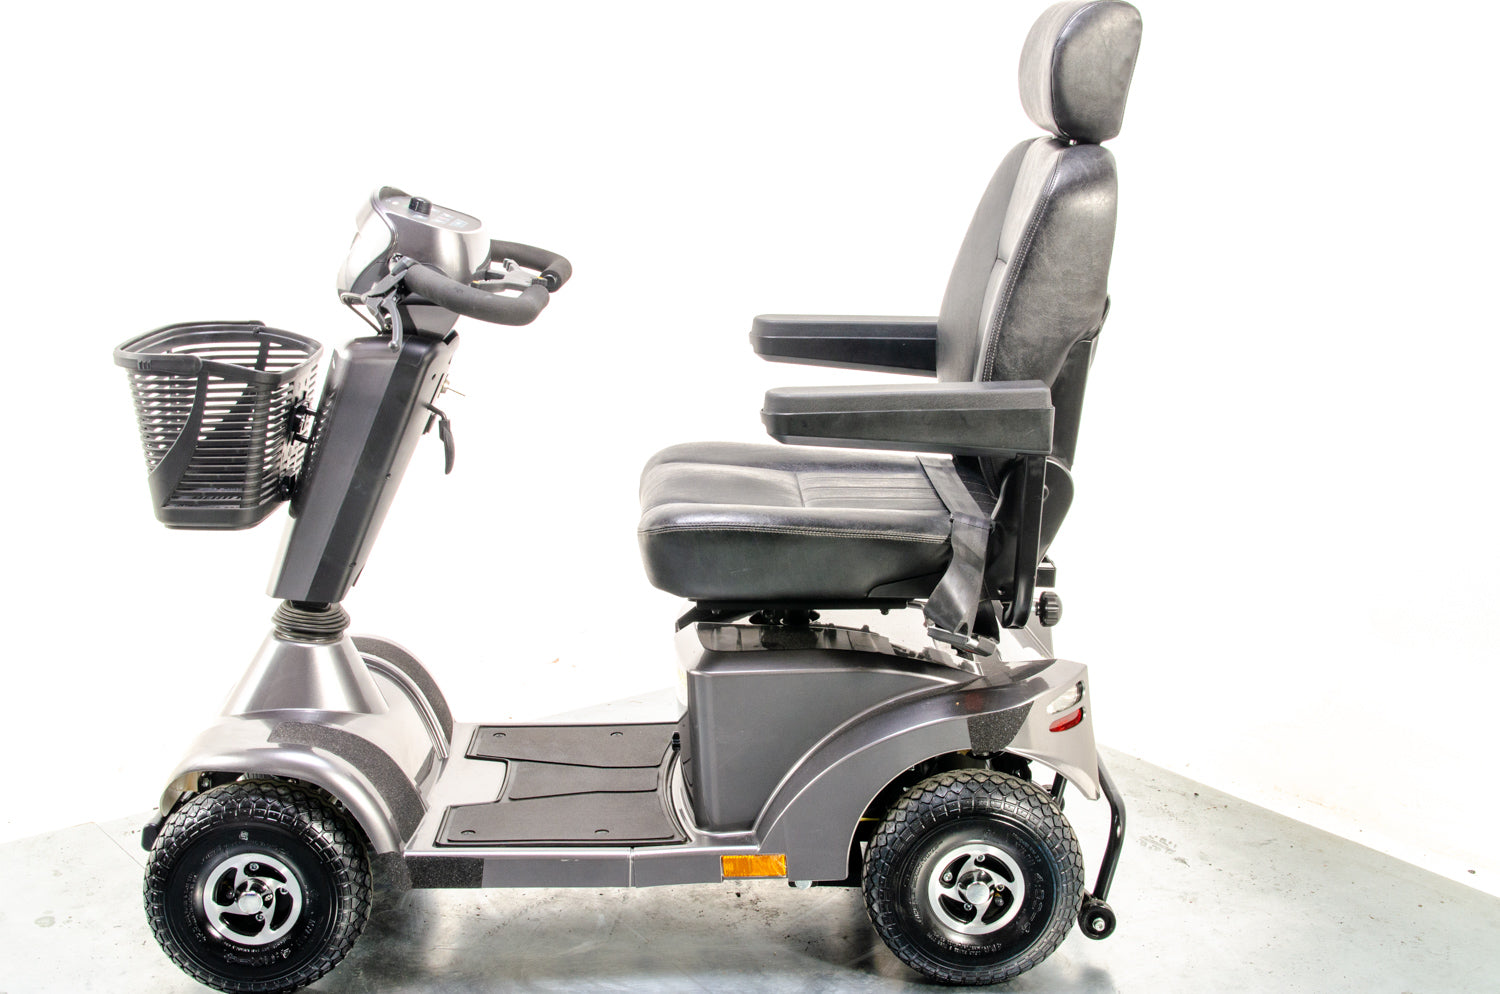 New Sterling S425 Mobility Scooter All-Terrain 8mph Midsize Pneumatic Pavement 13553